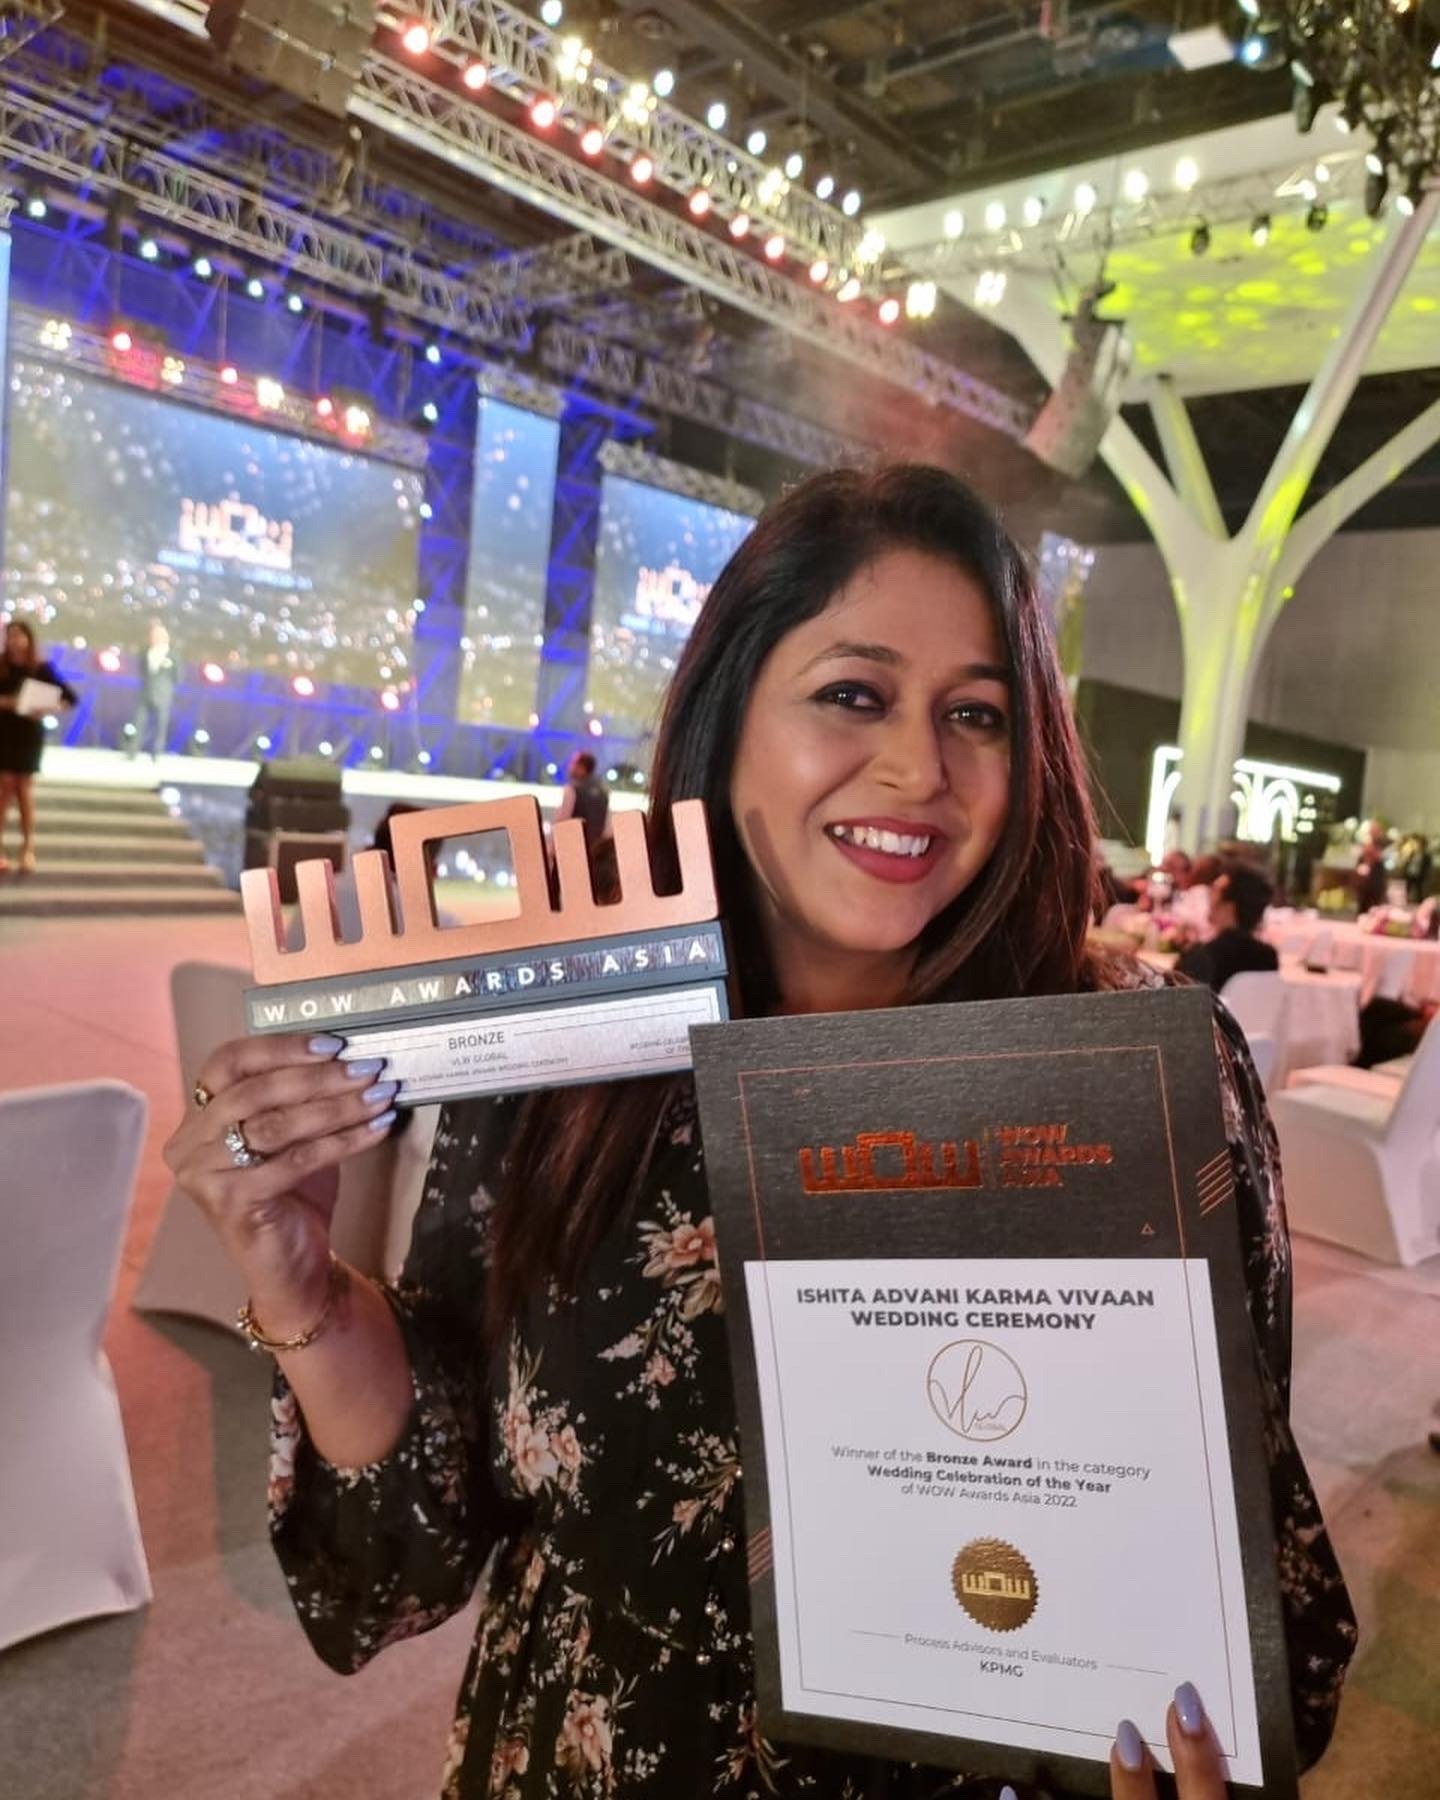 Wow awards  <span style="font-size: 12px"><br> Winner of the Bronze Award in the Category Wedding Celebration Of the Year  of WOW AWARDS ASIA 2022 </span>